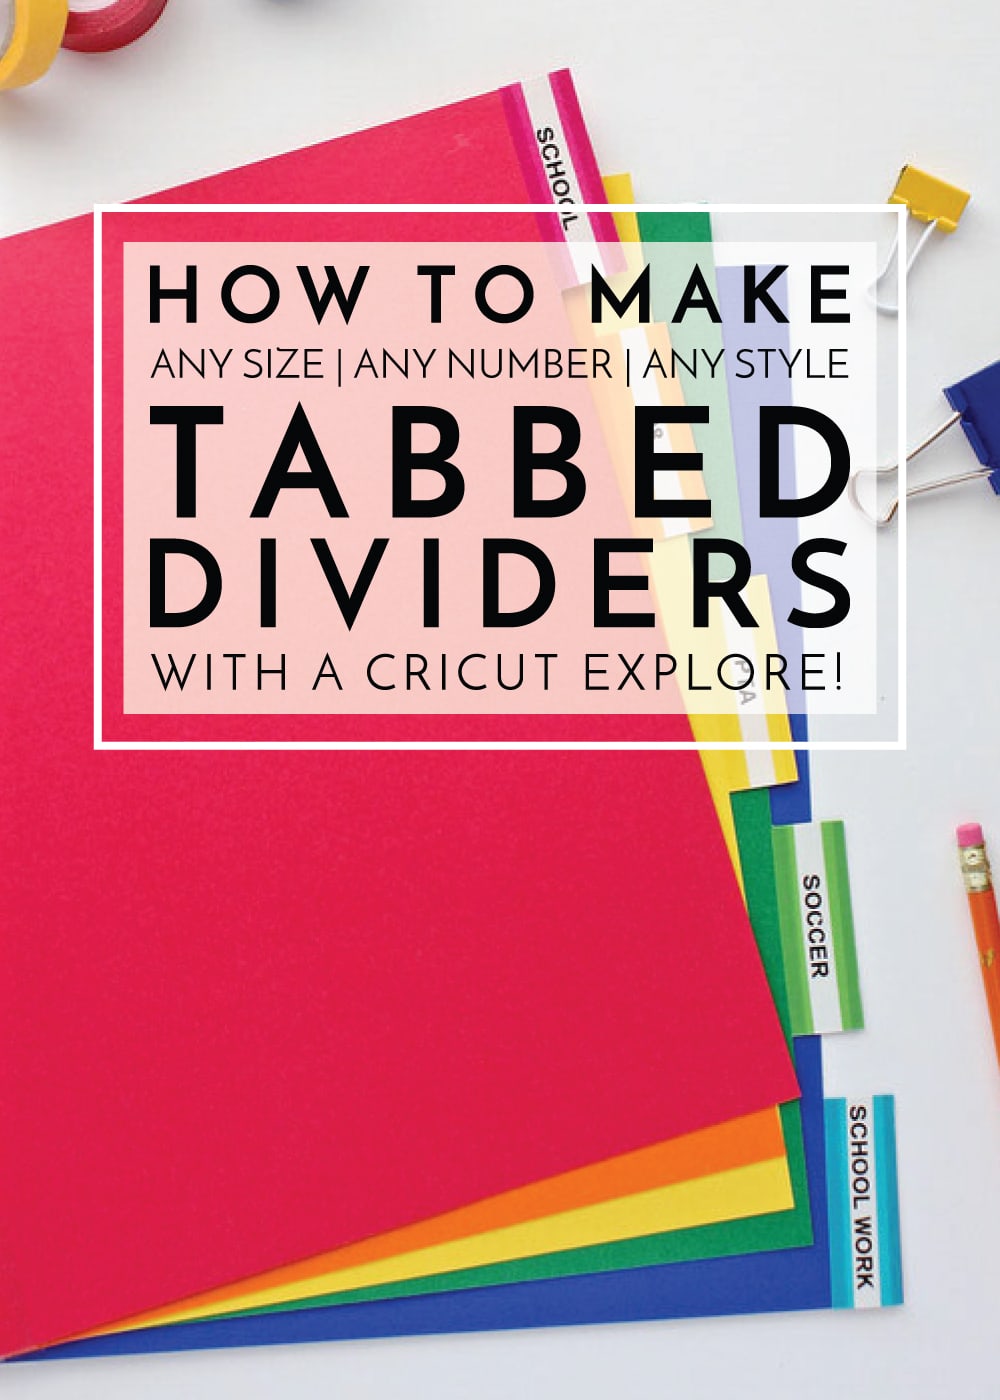 Learn how to make tabbed dividers on your Cricut Explore! No matter the shape, size, or style you prefer for your binders, this tutorial will show you how to customize them to any need!